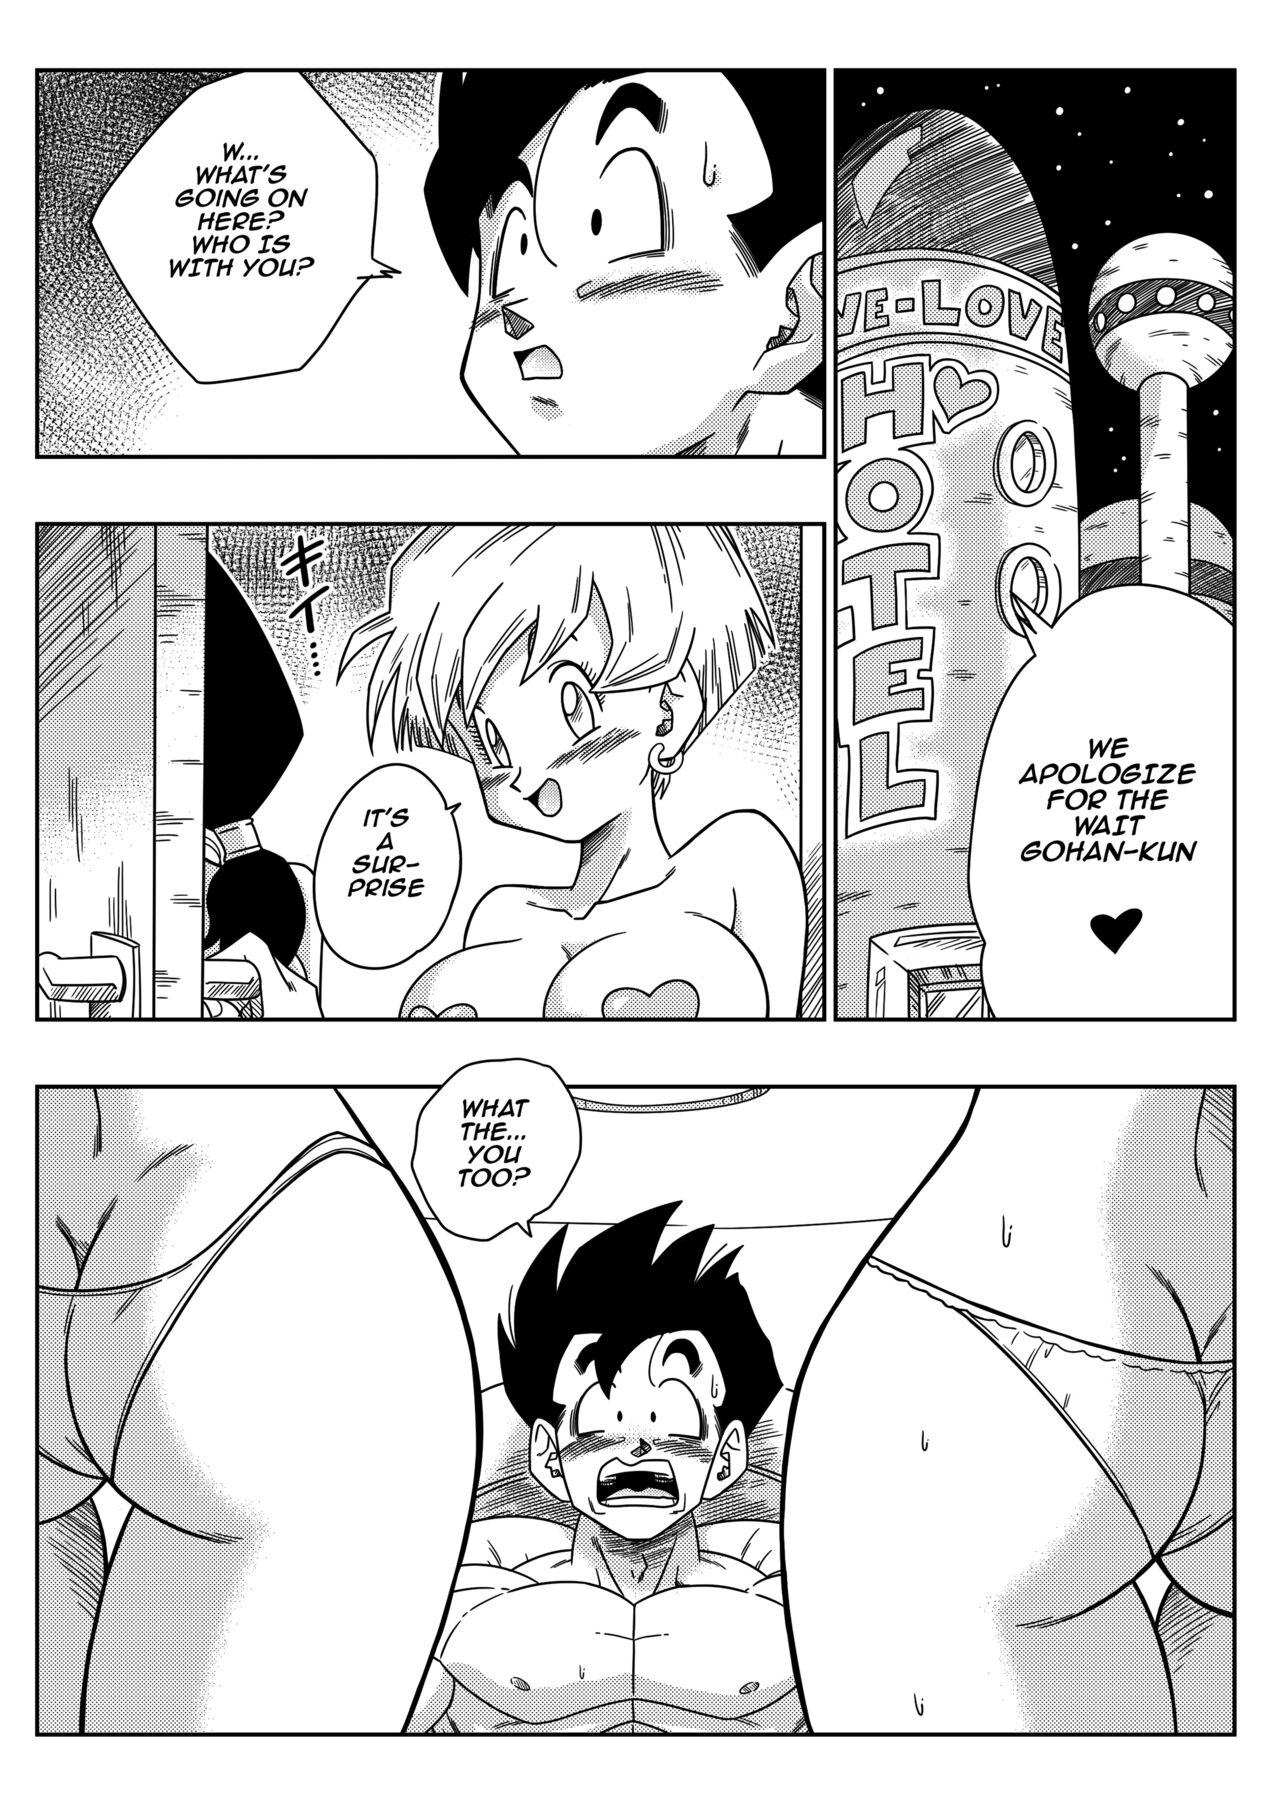 Strapon LOVE TRIANGLE Z - Part 2 Stud - Page 4